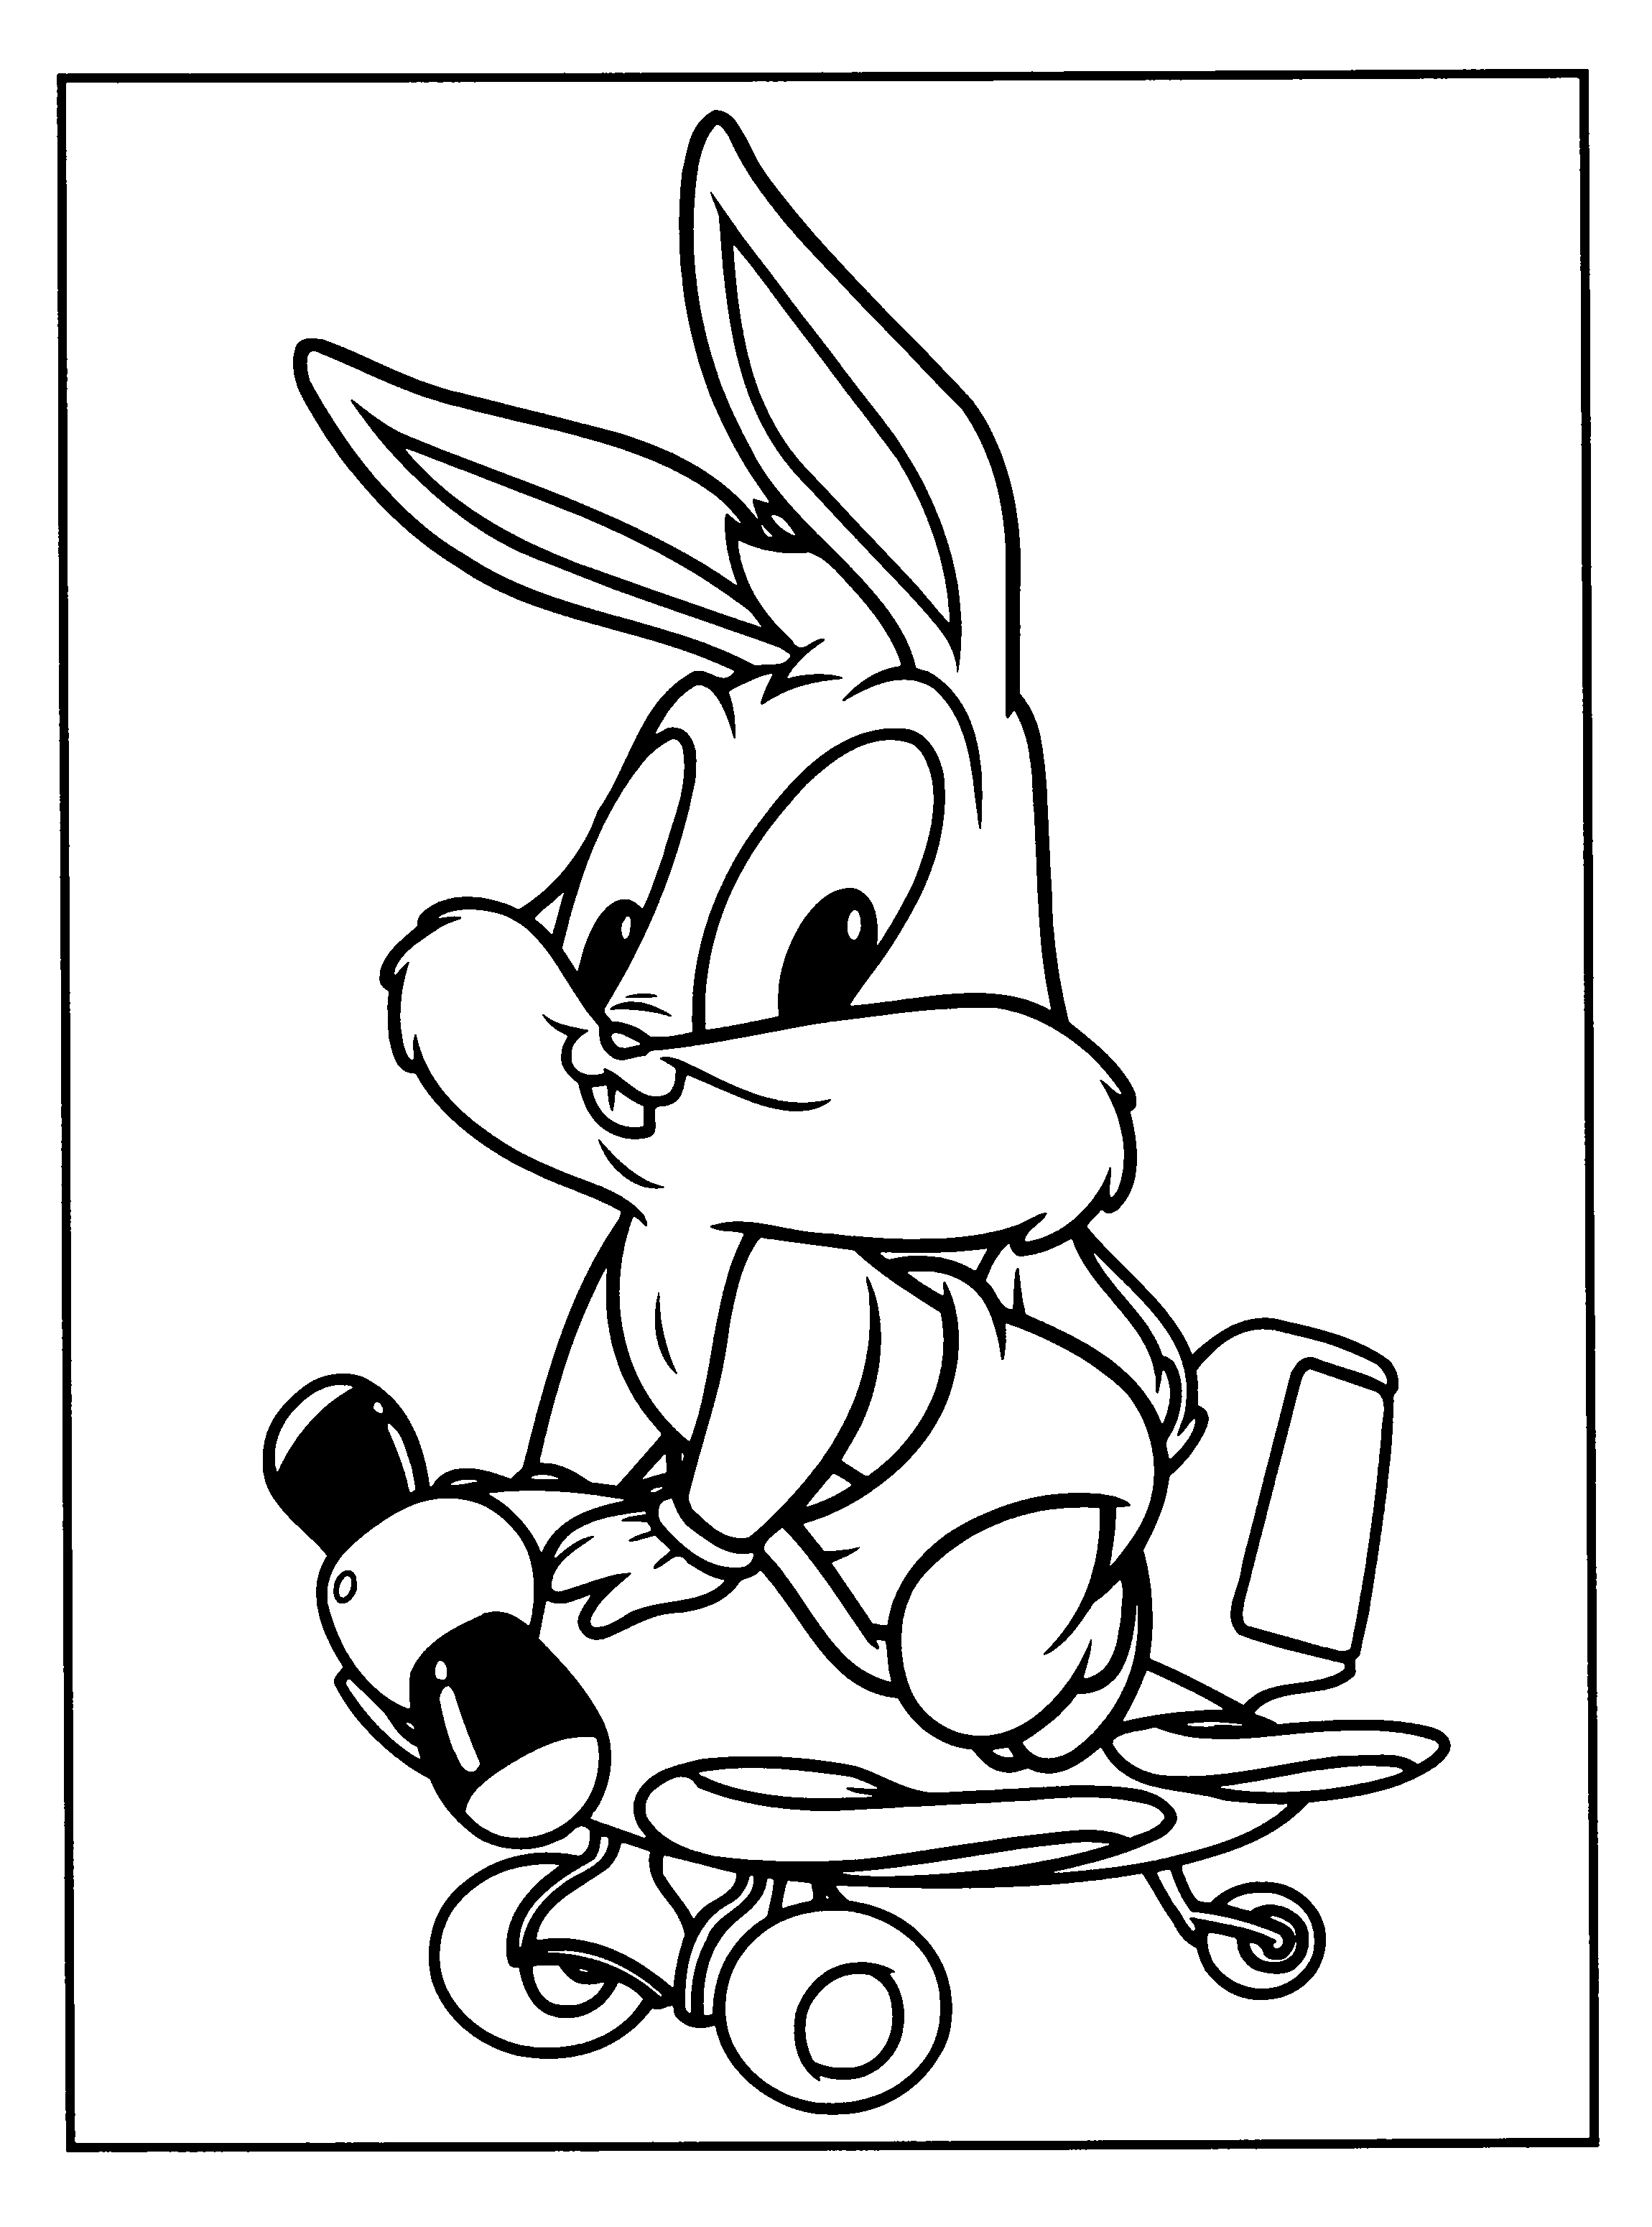 Looney tunes Coloring Pages